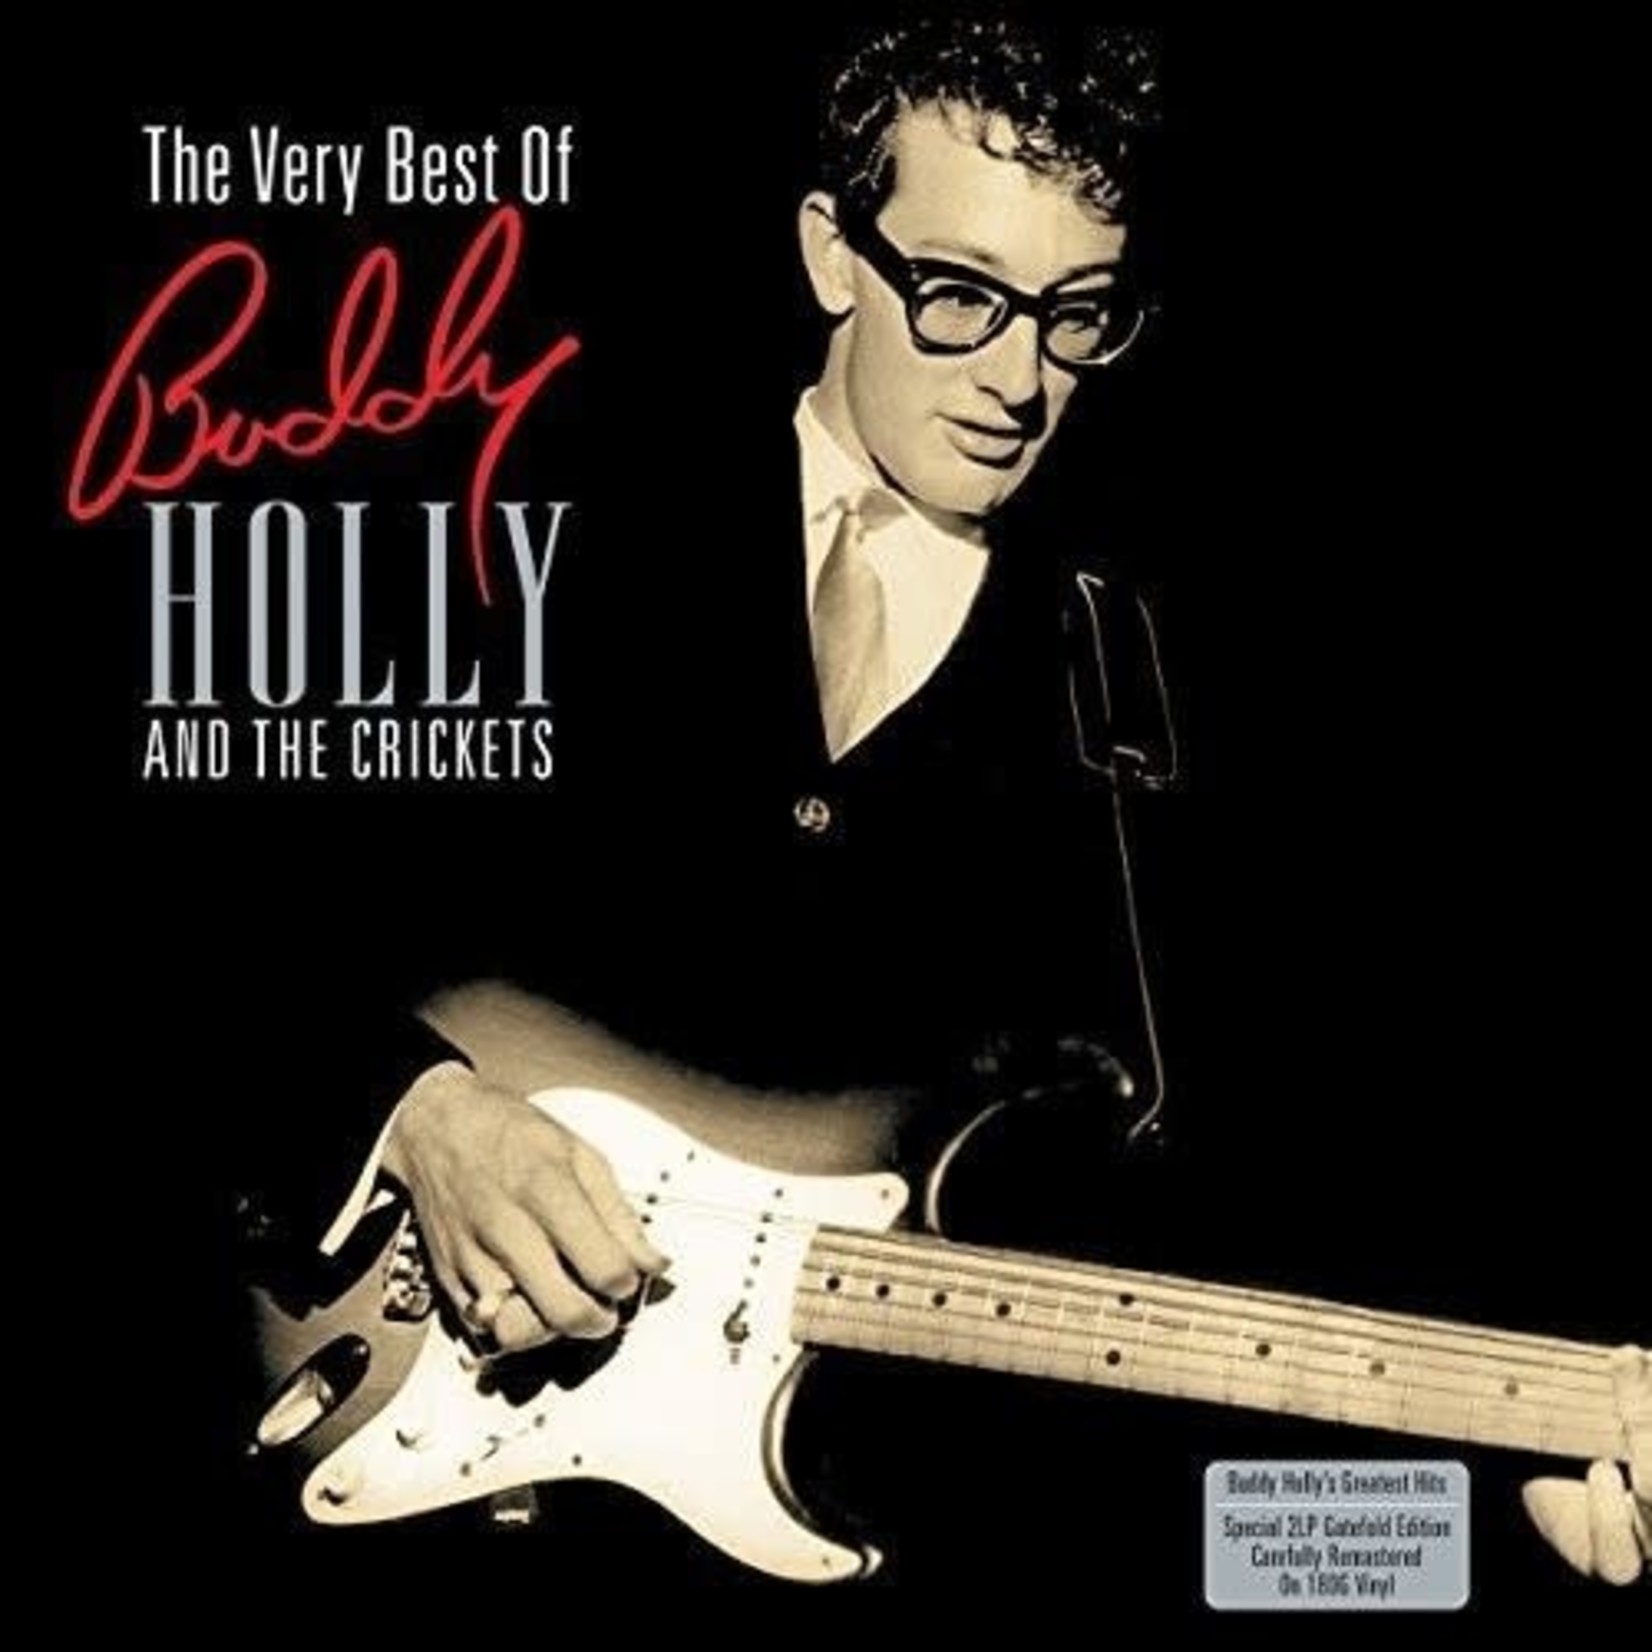 Buddy Holly - The Very Best Of Buddy Holly And The Crickets [2LP]